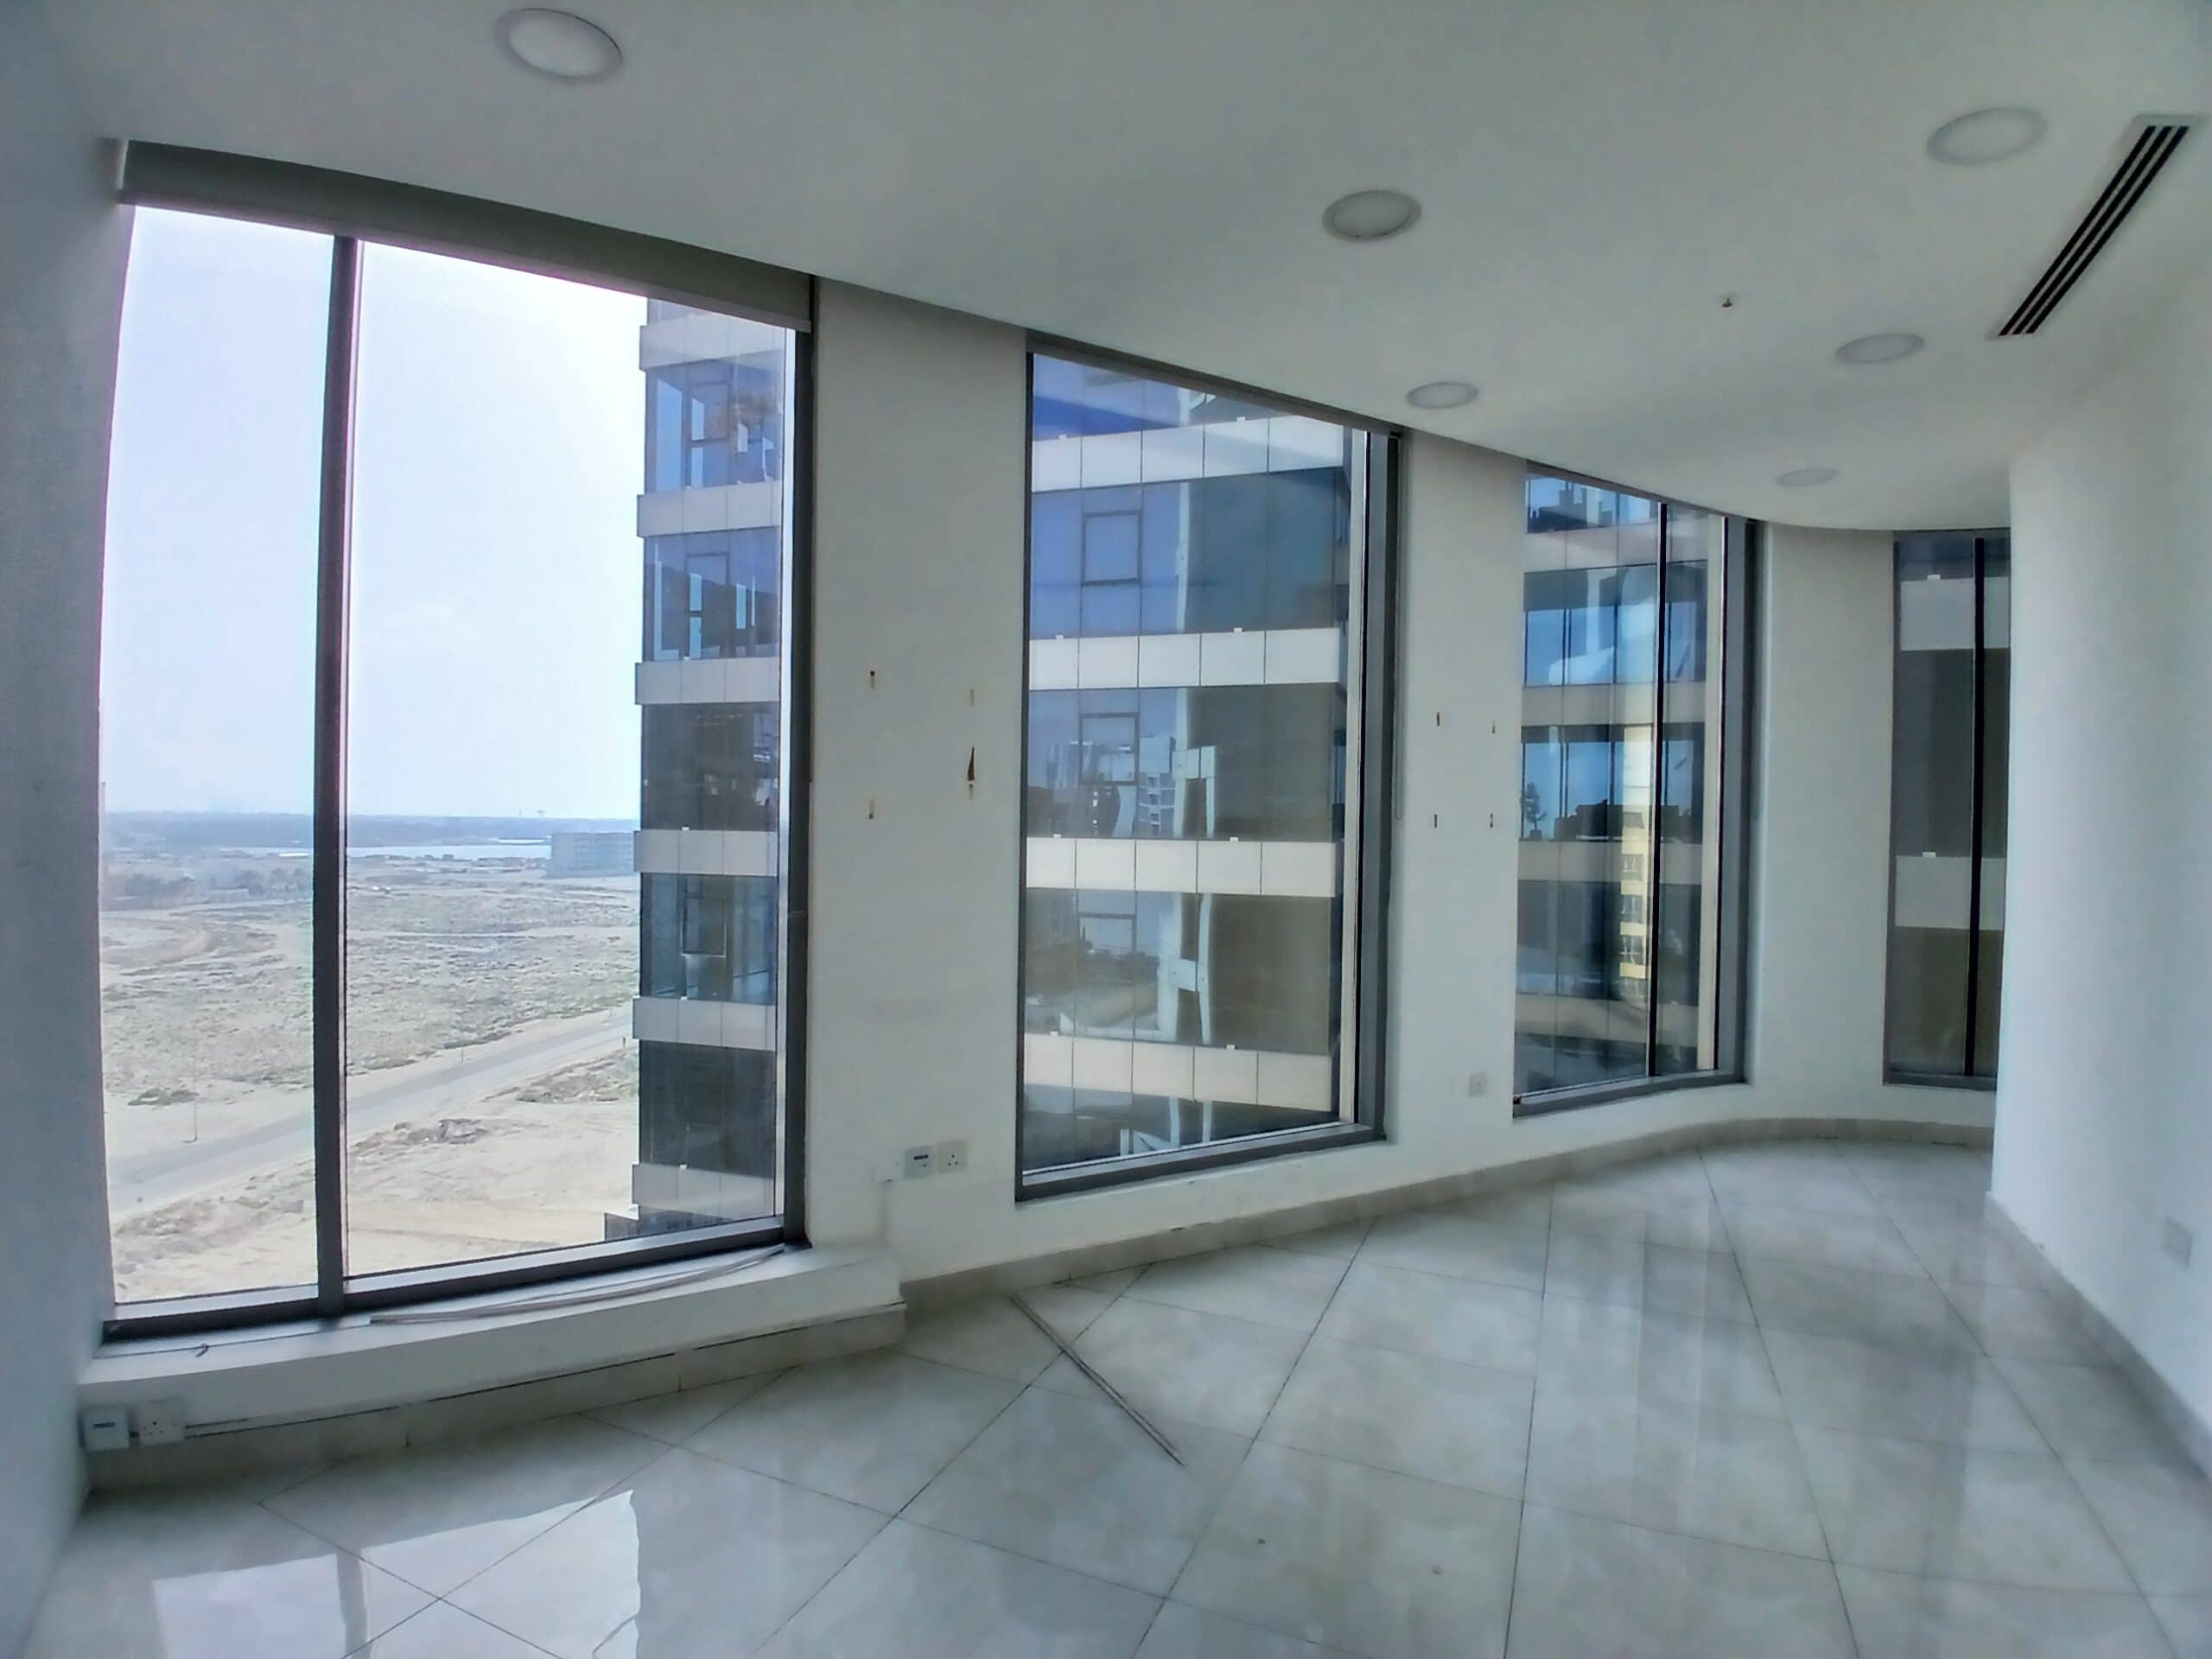 Empty modern apartment room with large floor-to-ceiling windows showing an Auto Draft construction site view.